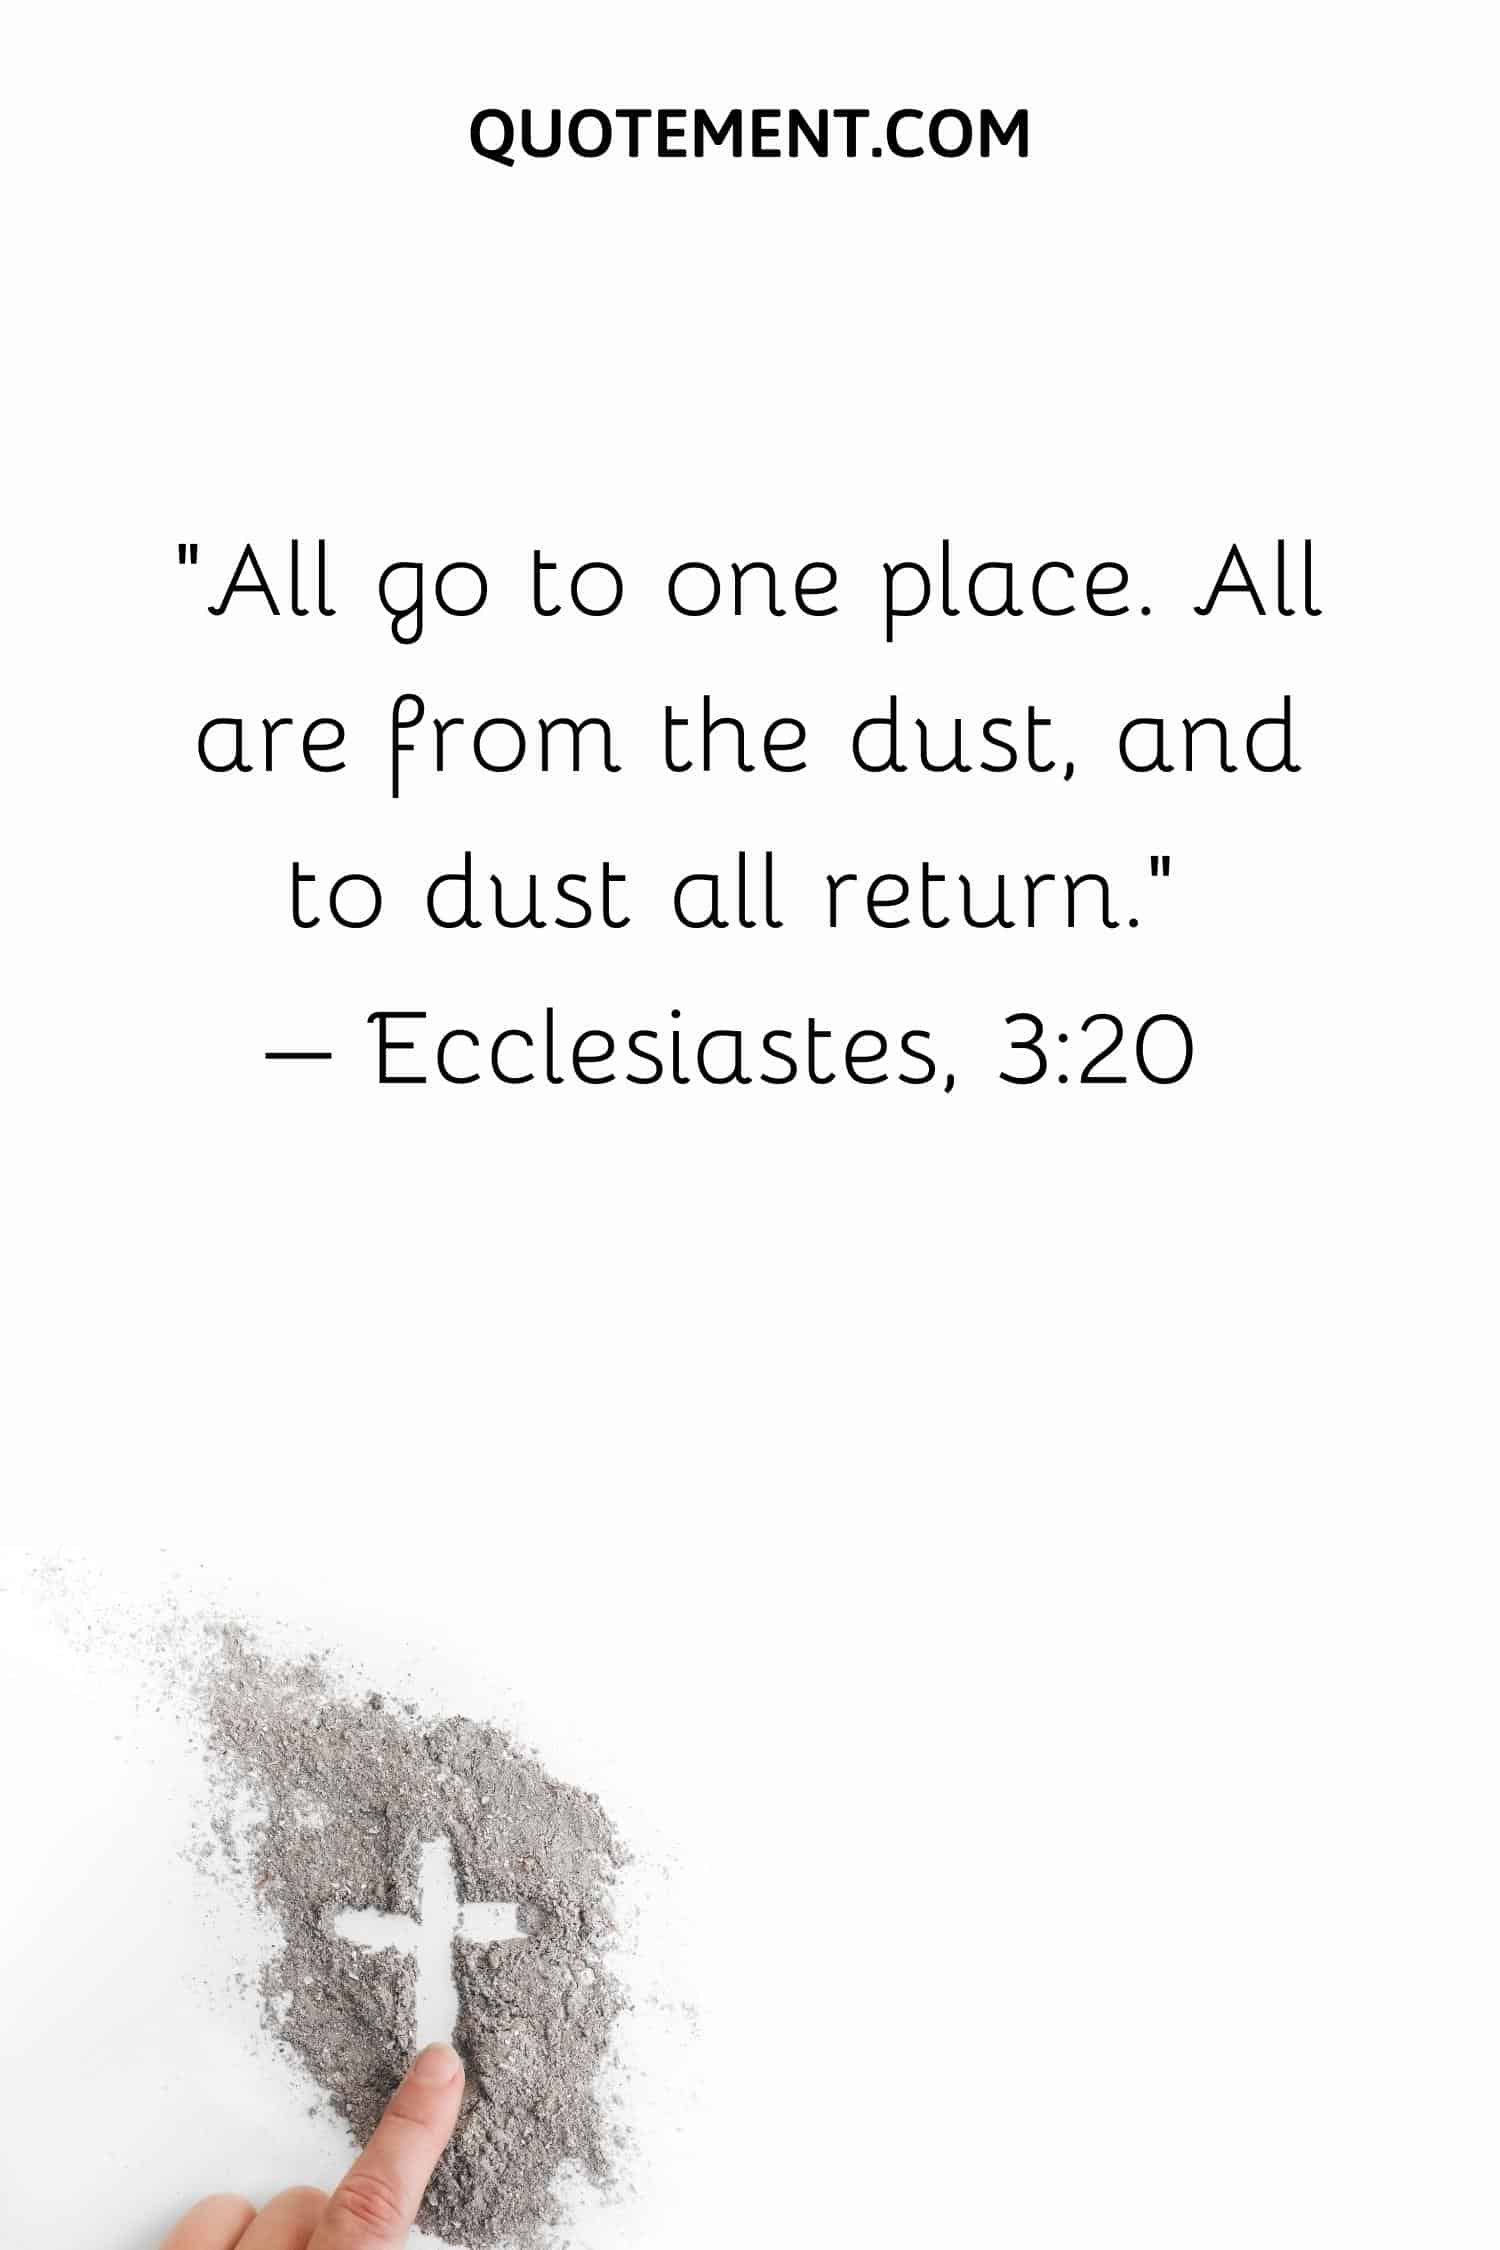 All go to one place. All are from the dust, and to dust all return